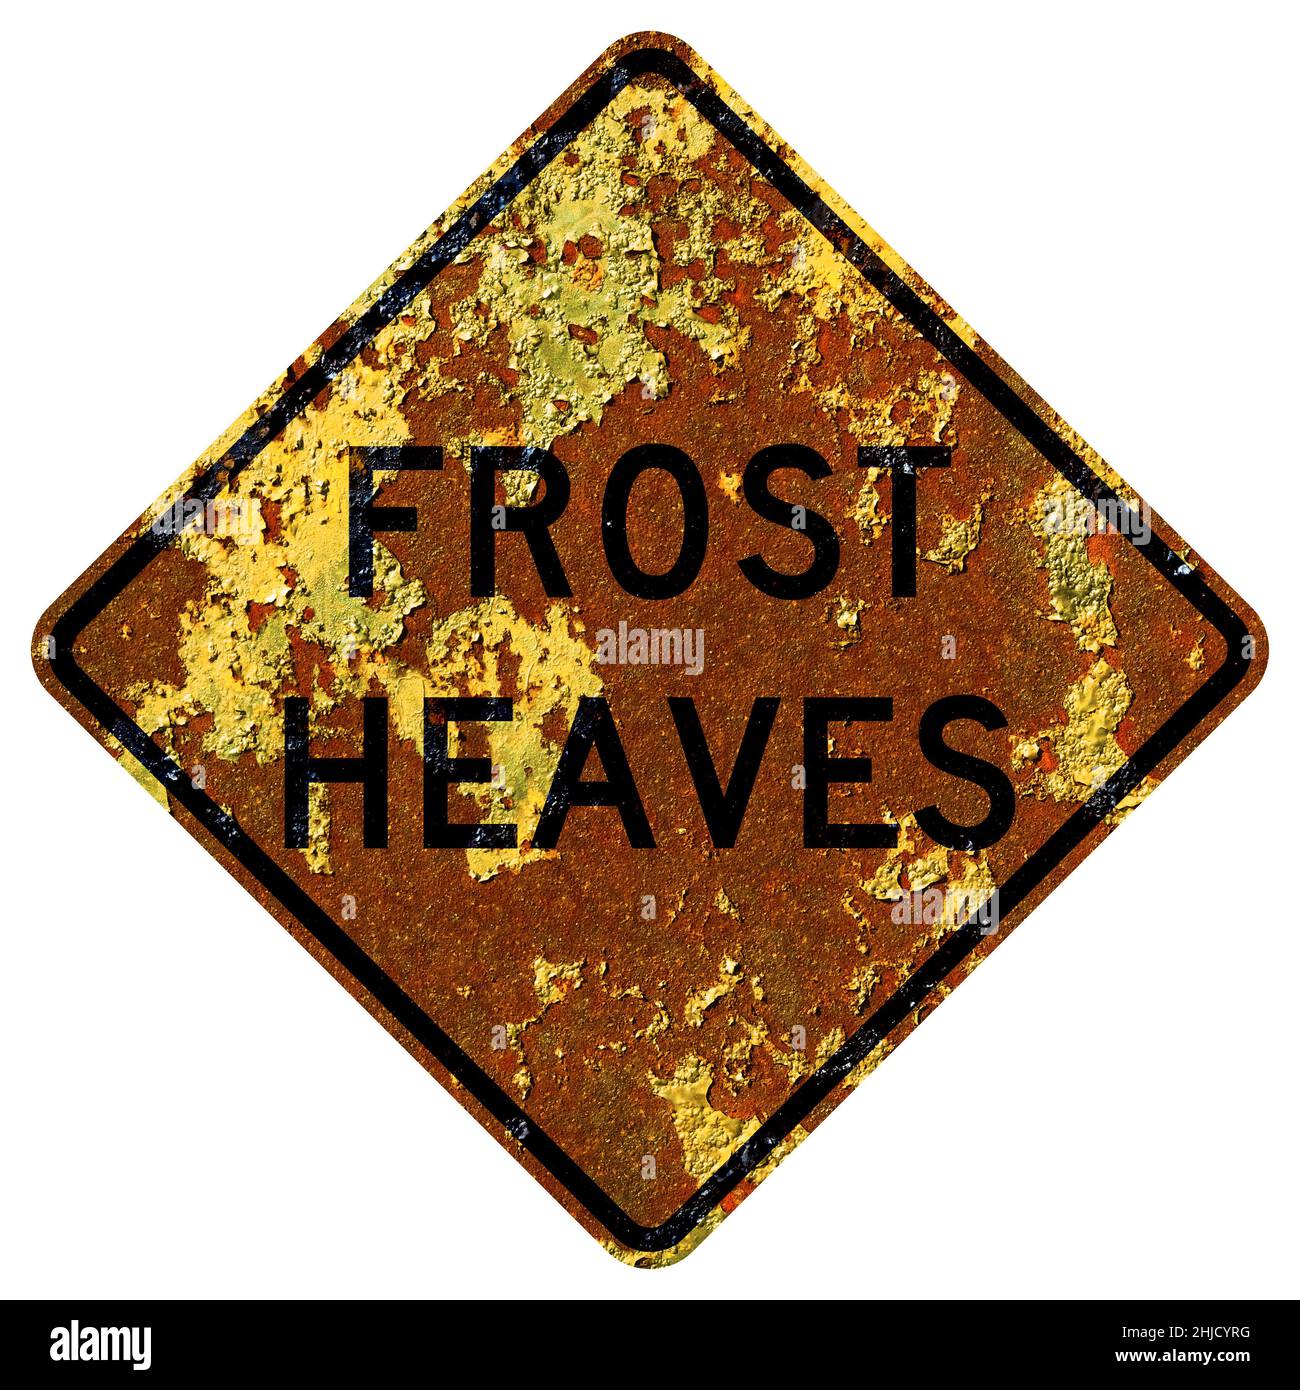 Old rusty American road sign - Frost heaves, Idaho Stock Photo